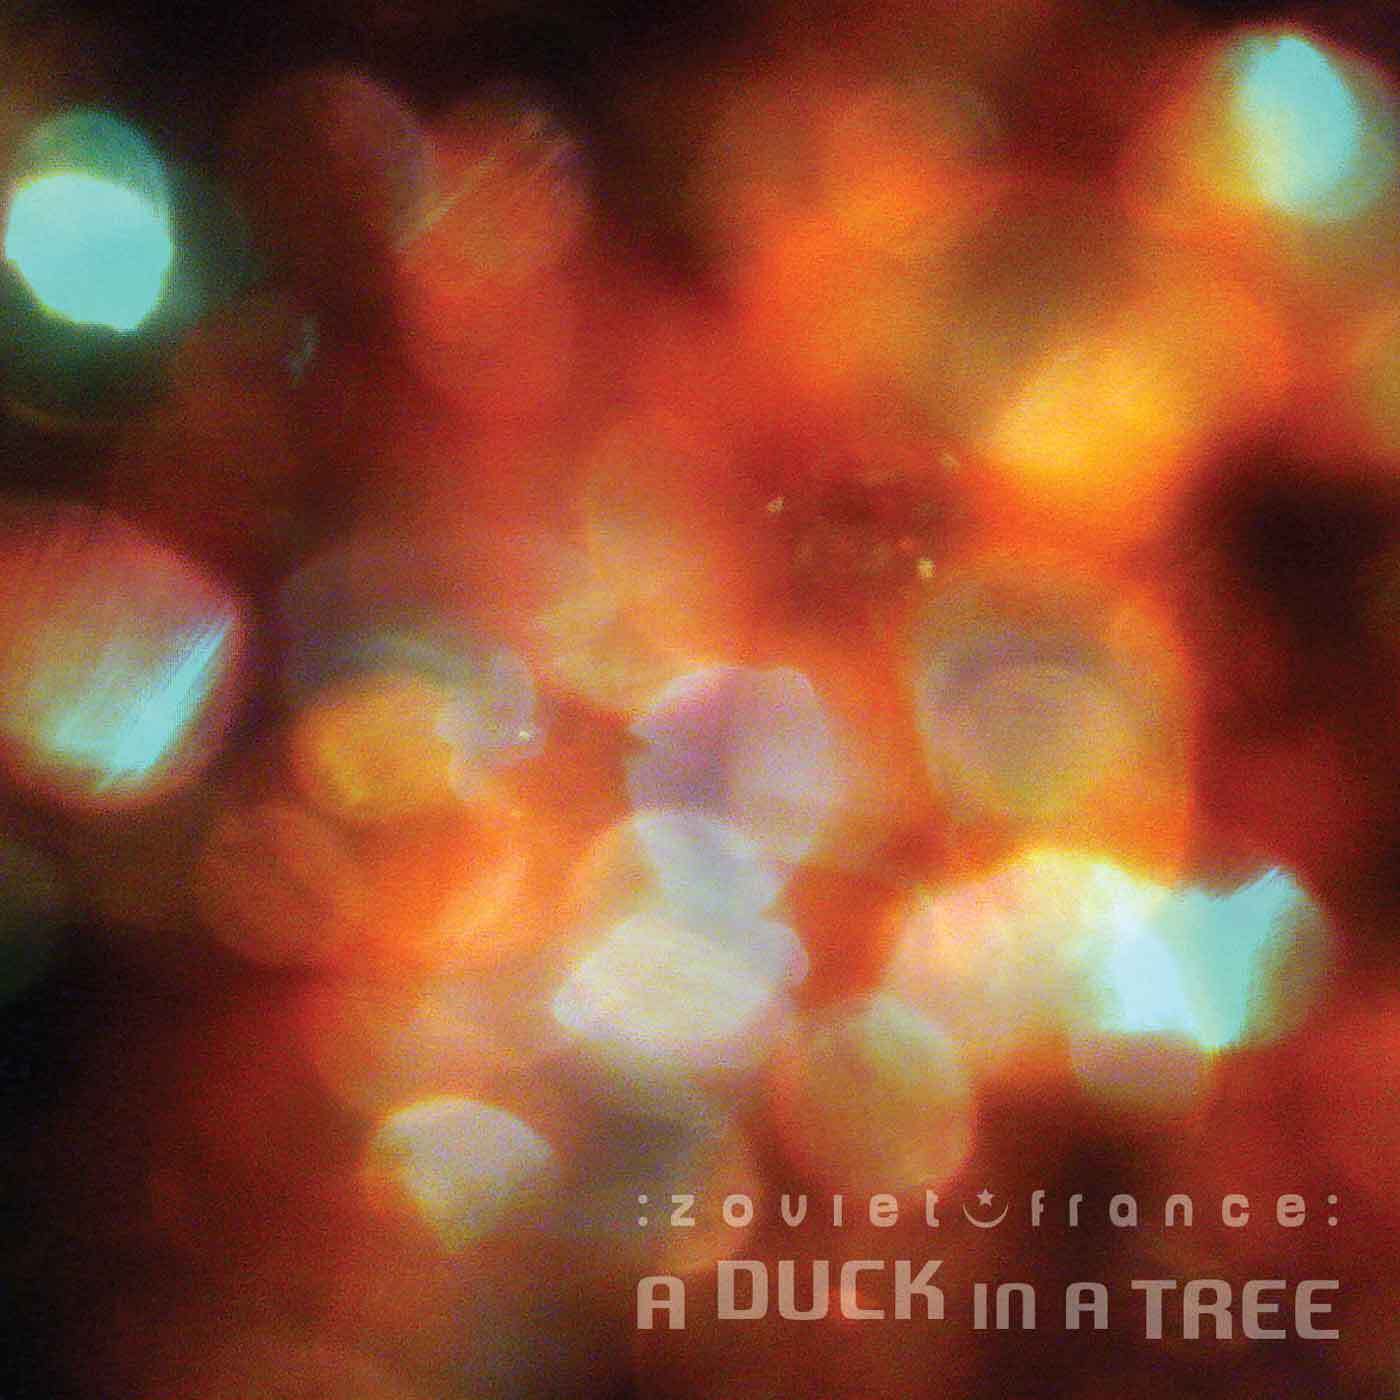 A-Duck-in-a-Tree-2014-11-29-_-About-the-